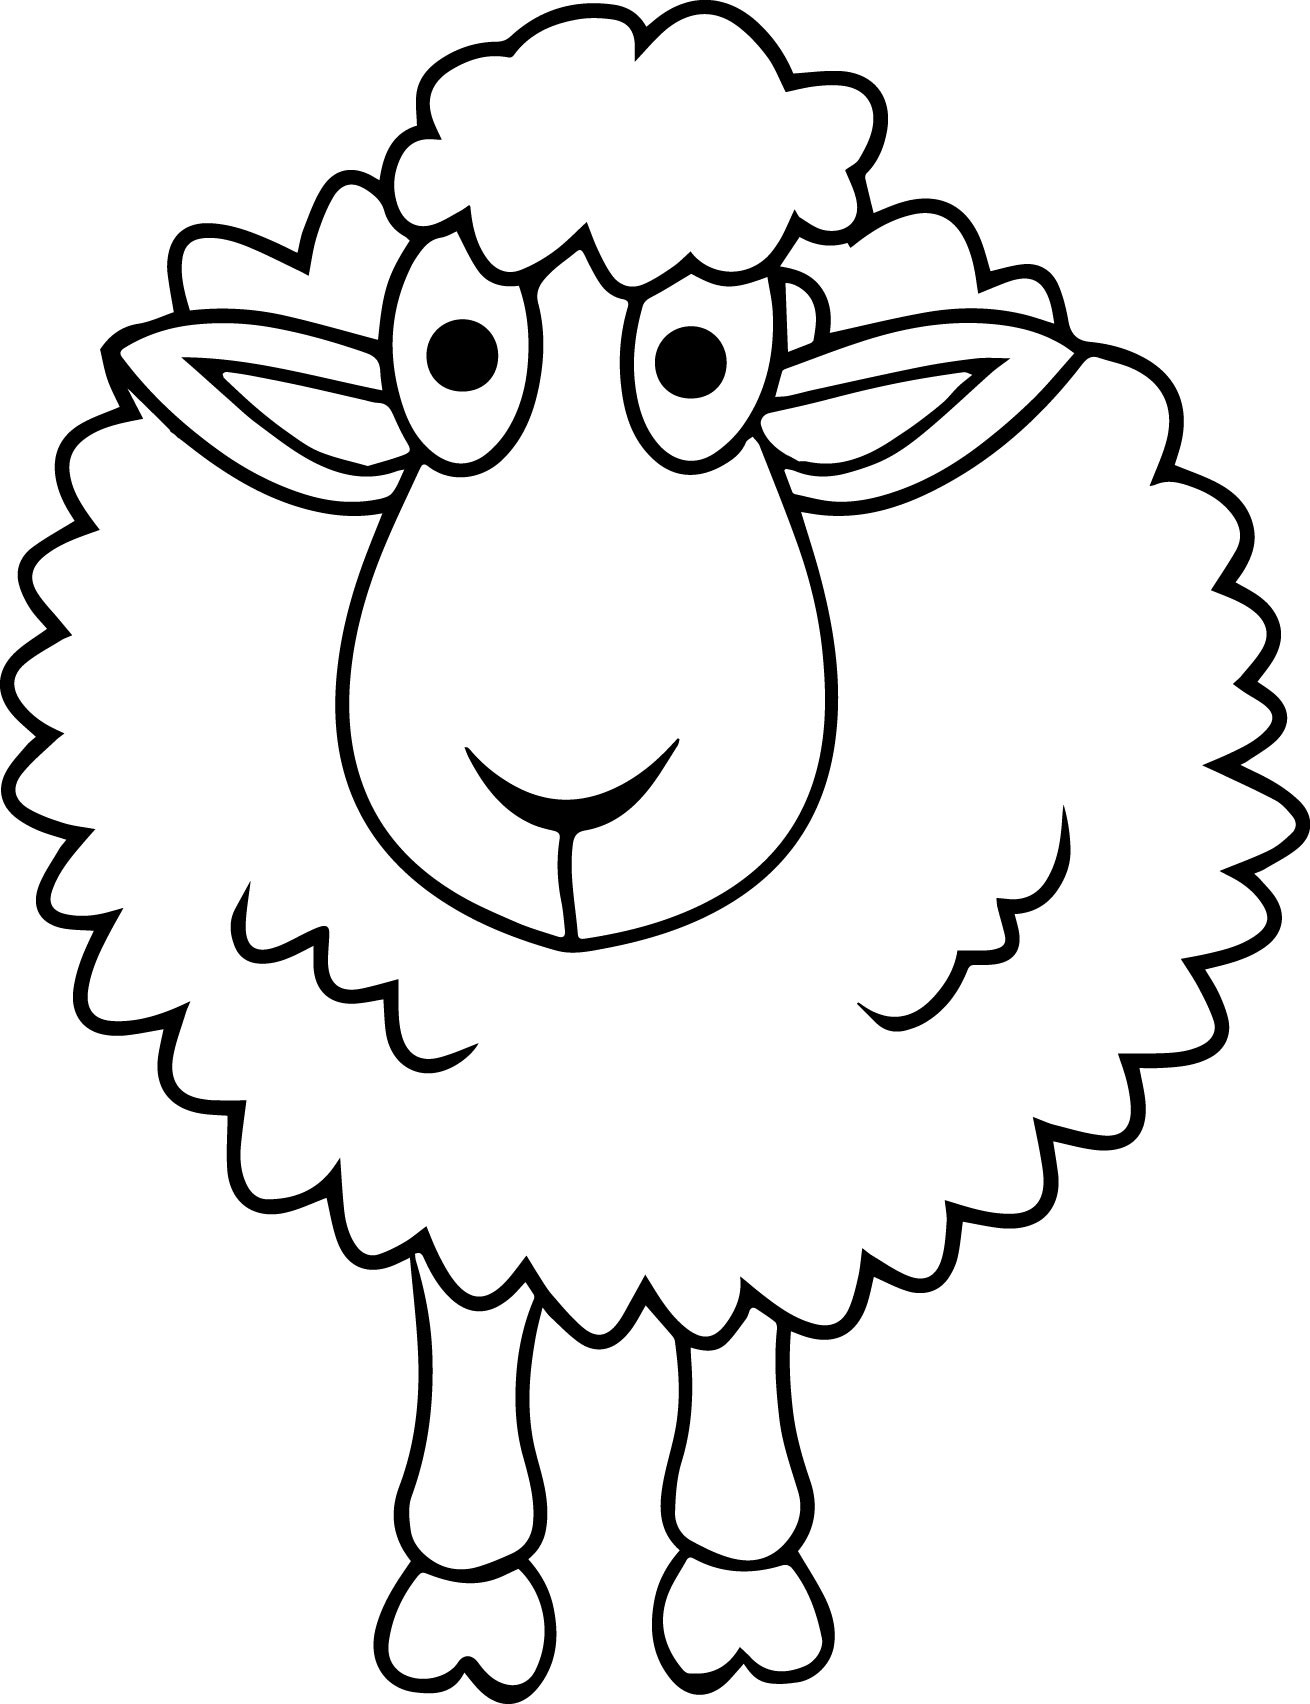 Sheep Face Coloring Page Shaun The Sheep Drawing At Getdrawings Free For Personal Use